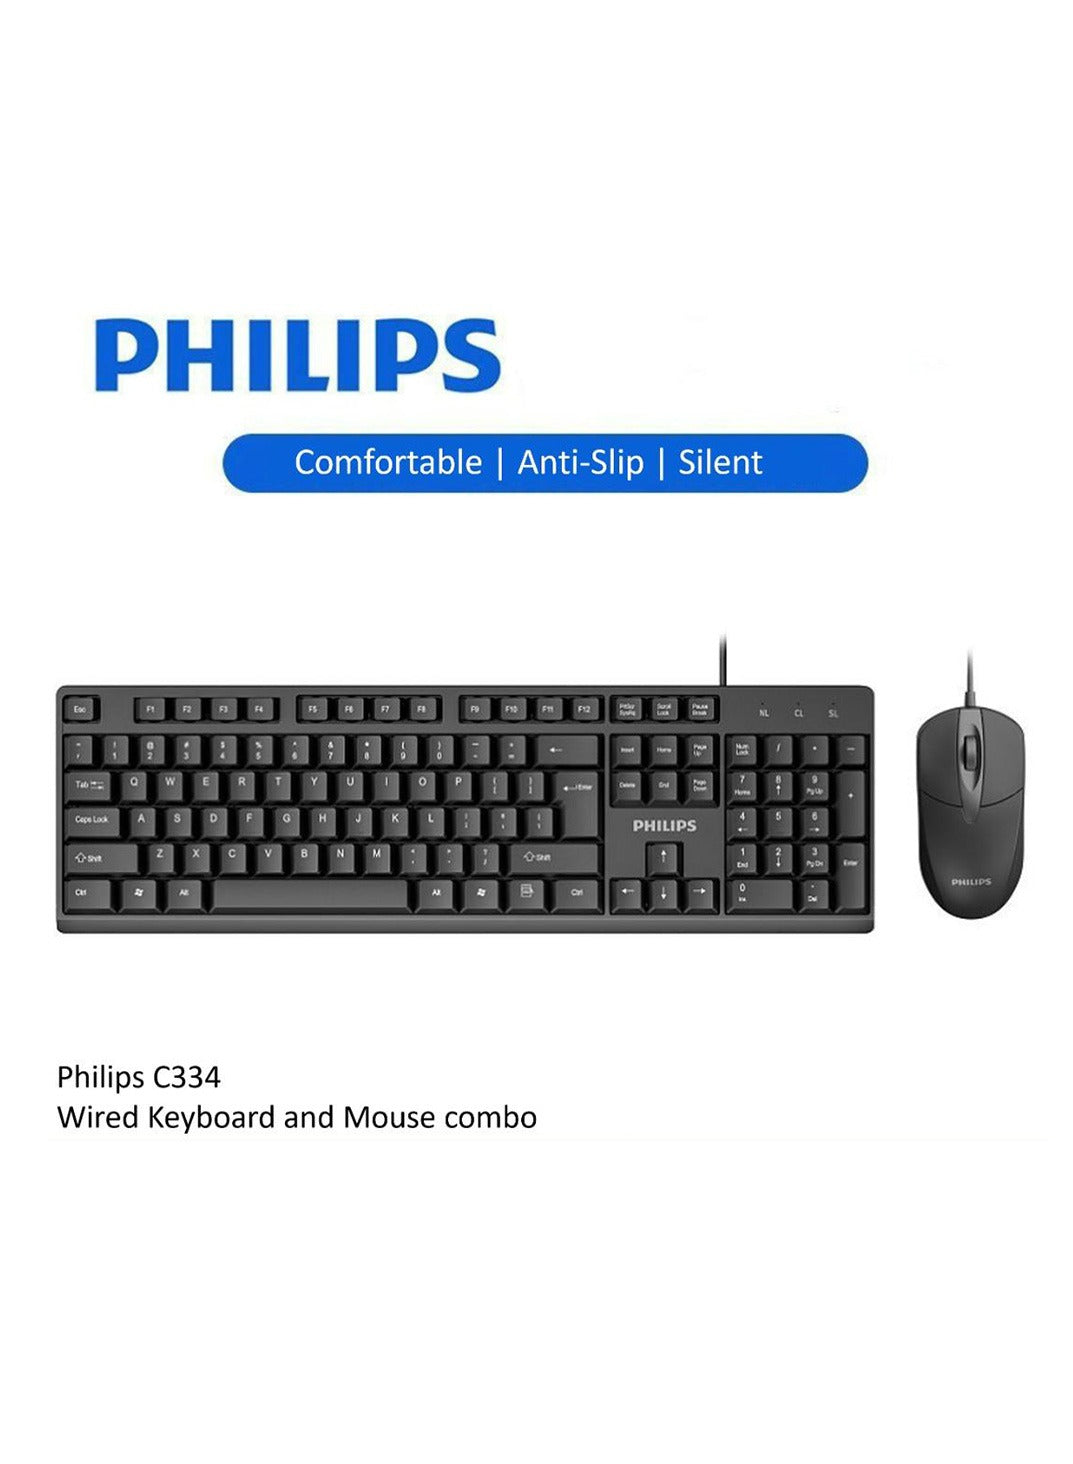 C334 Wired Keyboard and Mouse combo